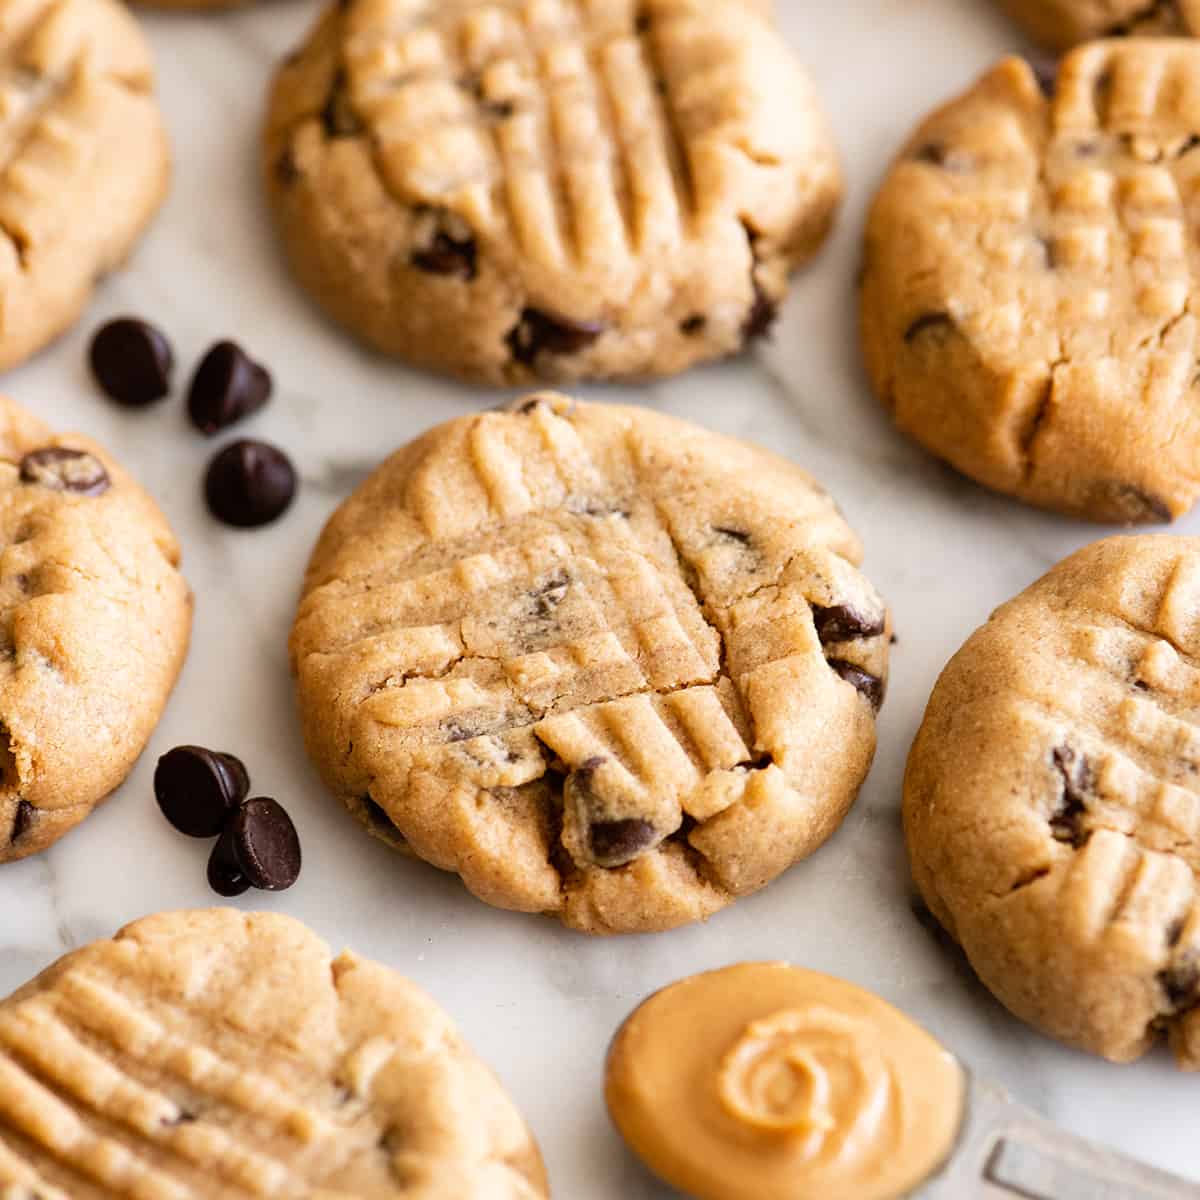 7 Peanut Butter Chocolate Chip Cookies